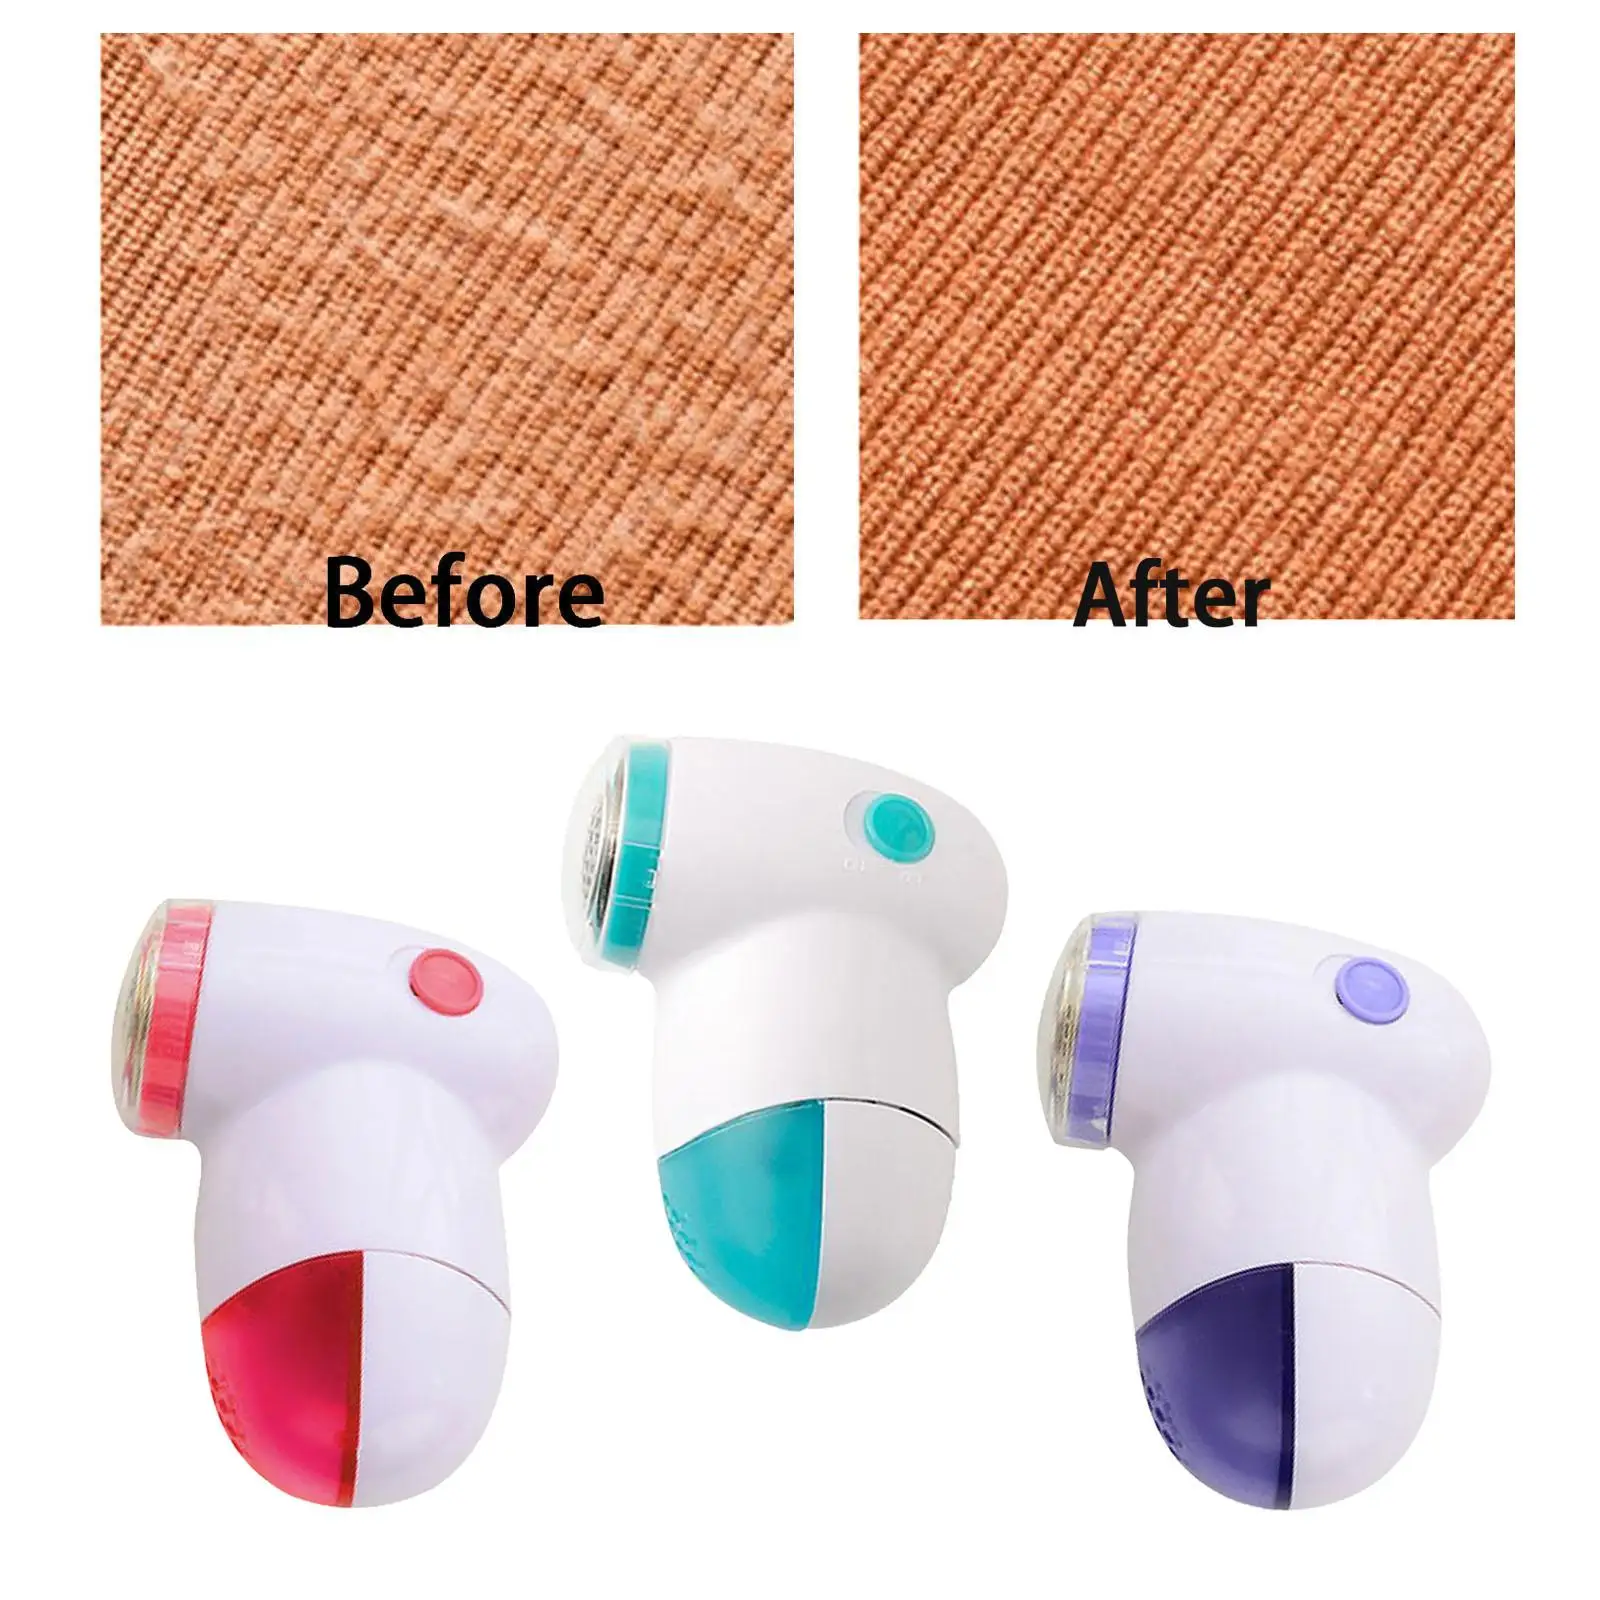 Mini Fuzz Remover Cleaning Tool Detachable Fabric Pilling Removal Machine for Woven Coat Pet Hair Blanket Car Seats Clothing